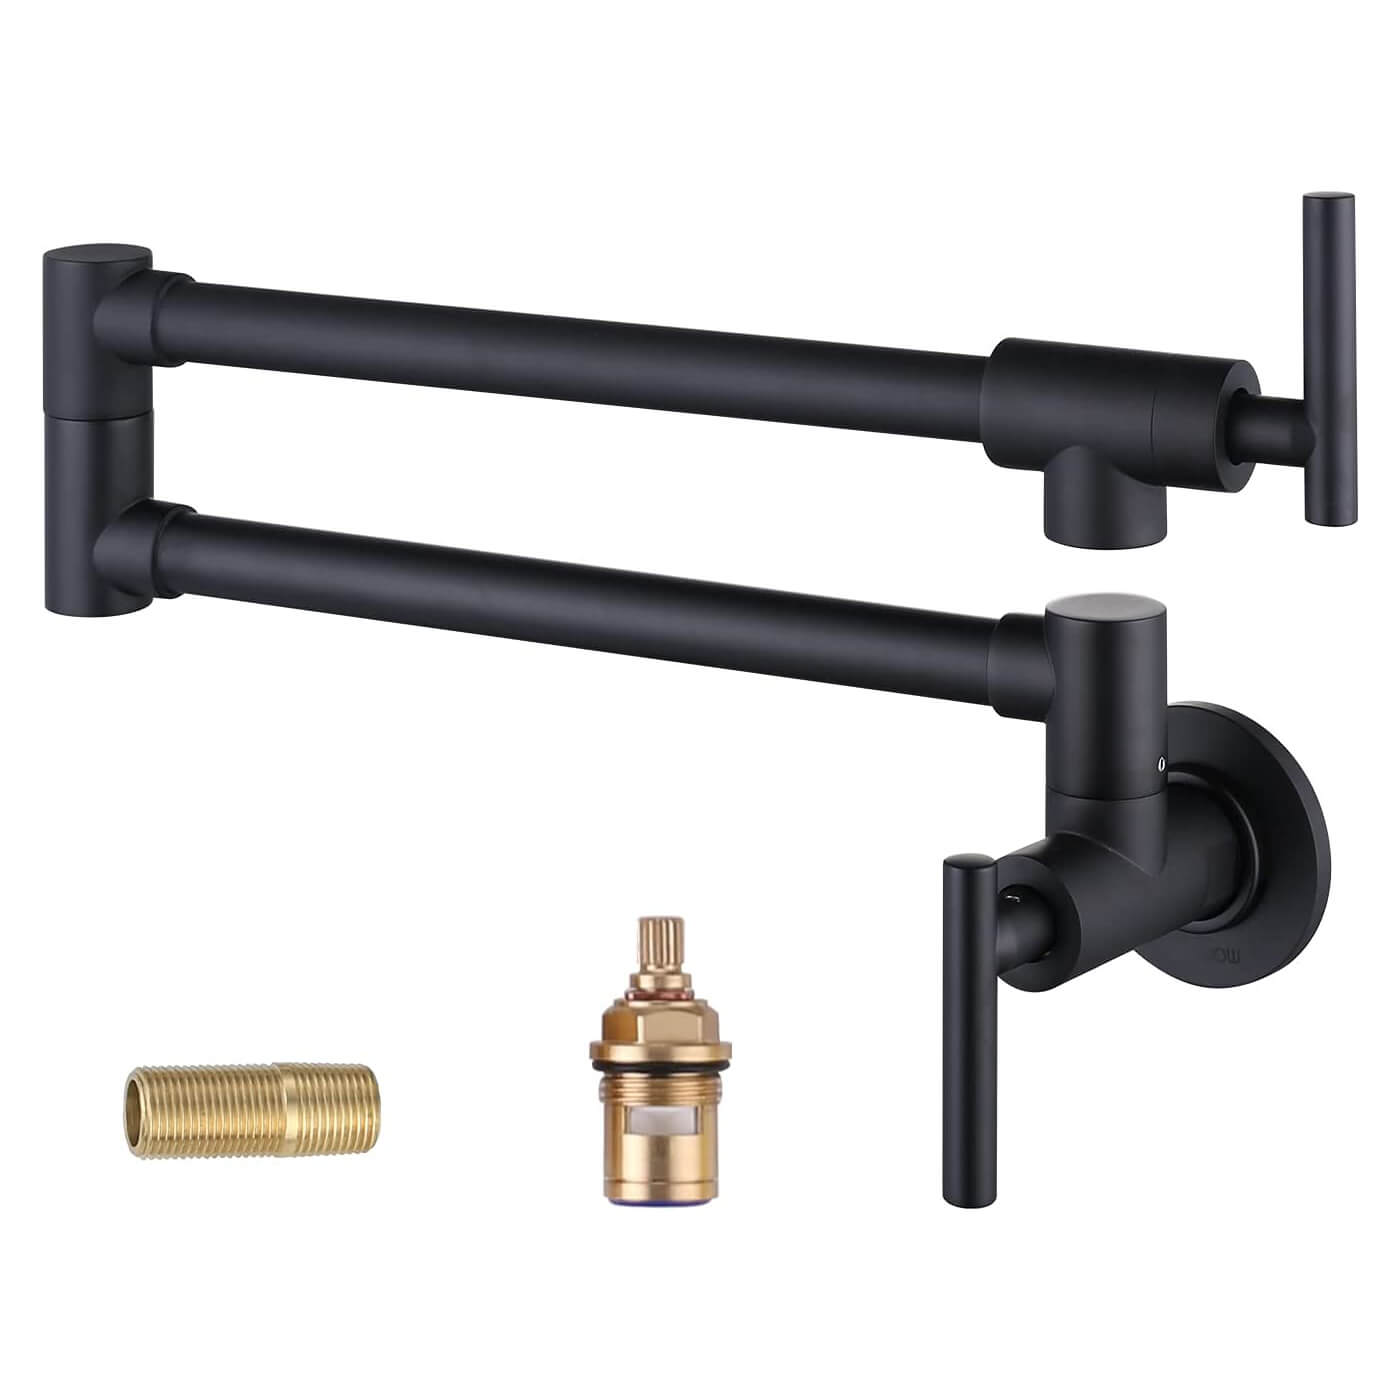 iVIGA Matte Black Commercial Wall Mount Pot Filler Faucet Stretchable Double Joint Swing Arm